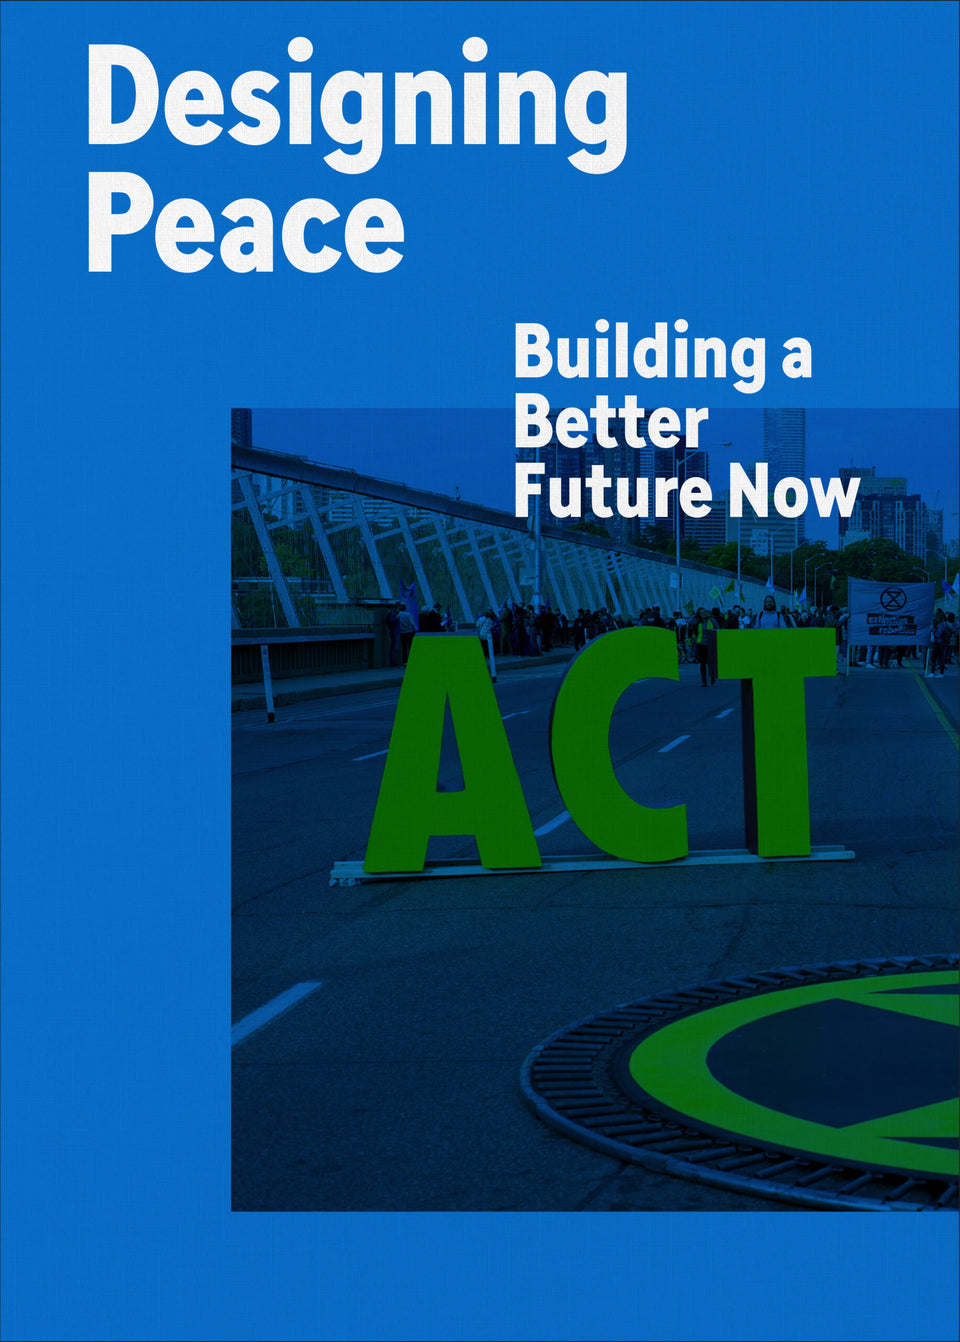 Designing Peace: Building a Better Future Now - Designing-Peace-Jacket-scaled